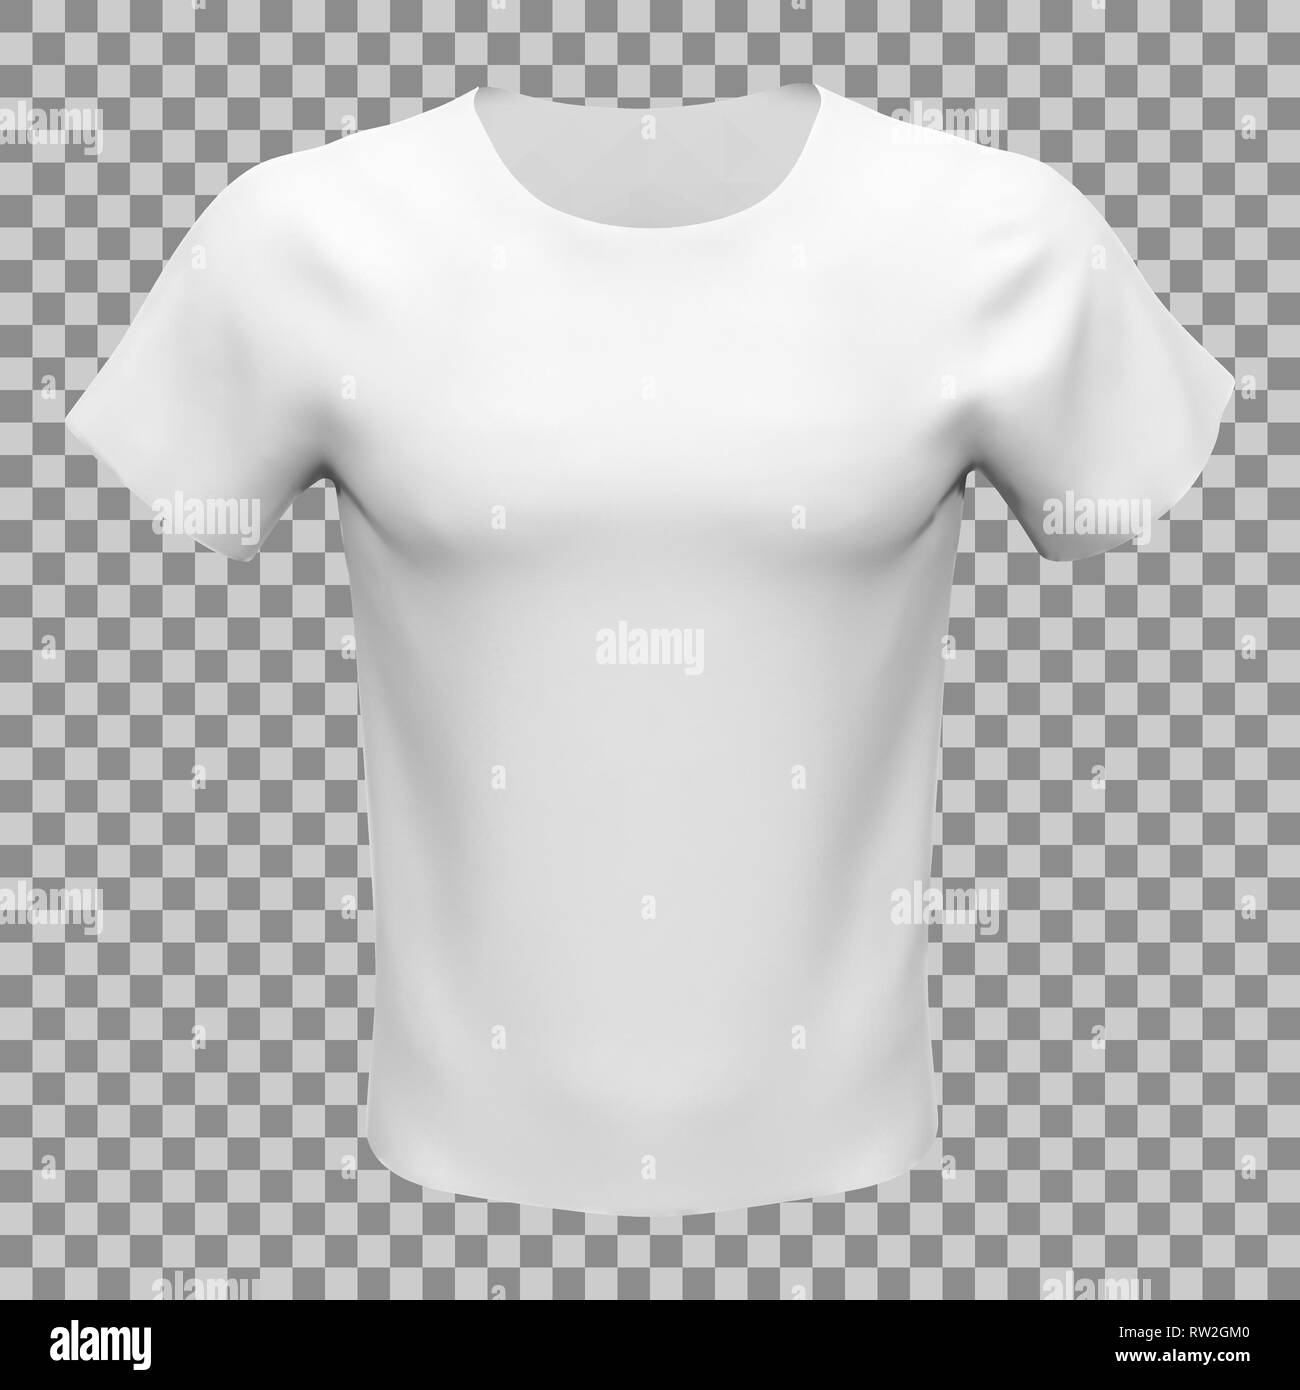 Blank mockup of white basic unisex t-shirt, front view, on checkered background. Vector illustration Stock Vector